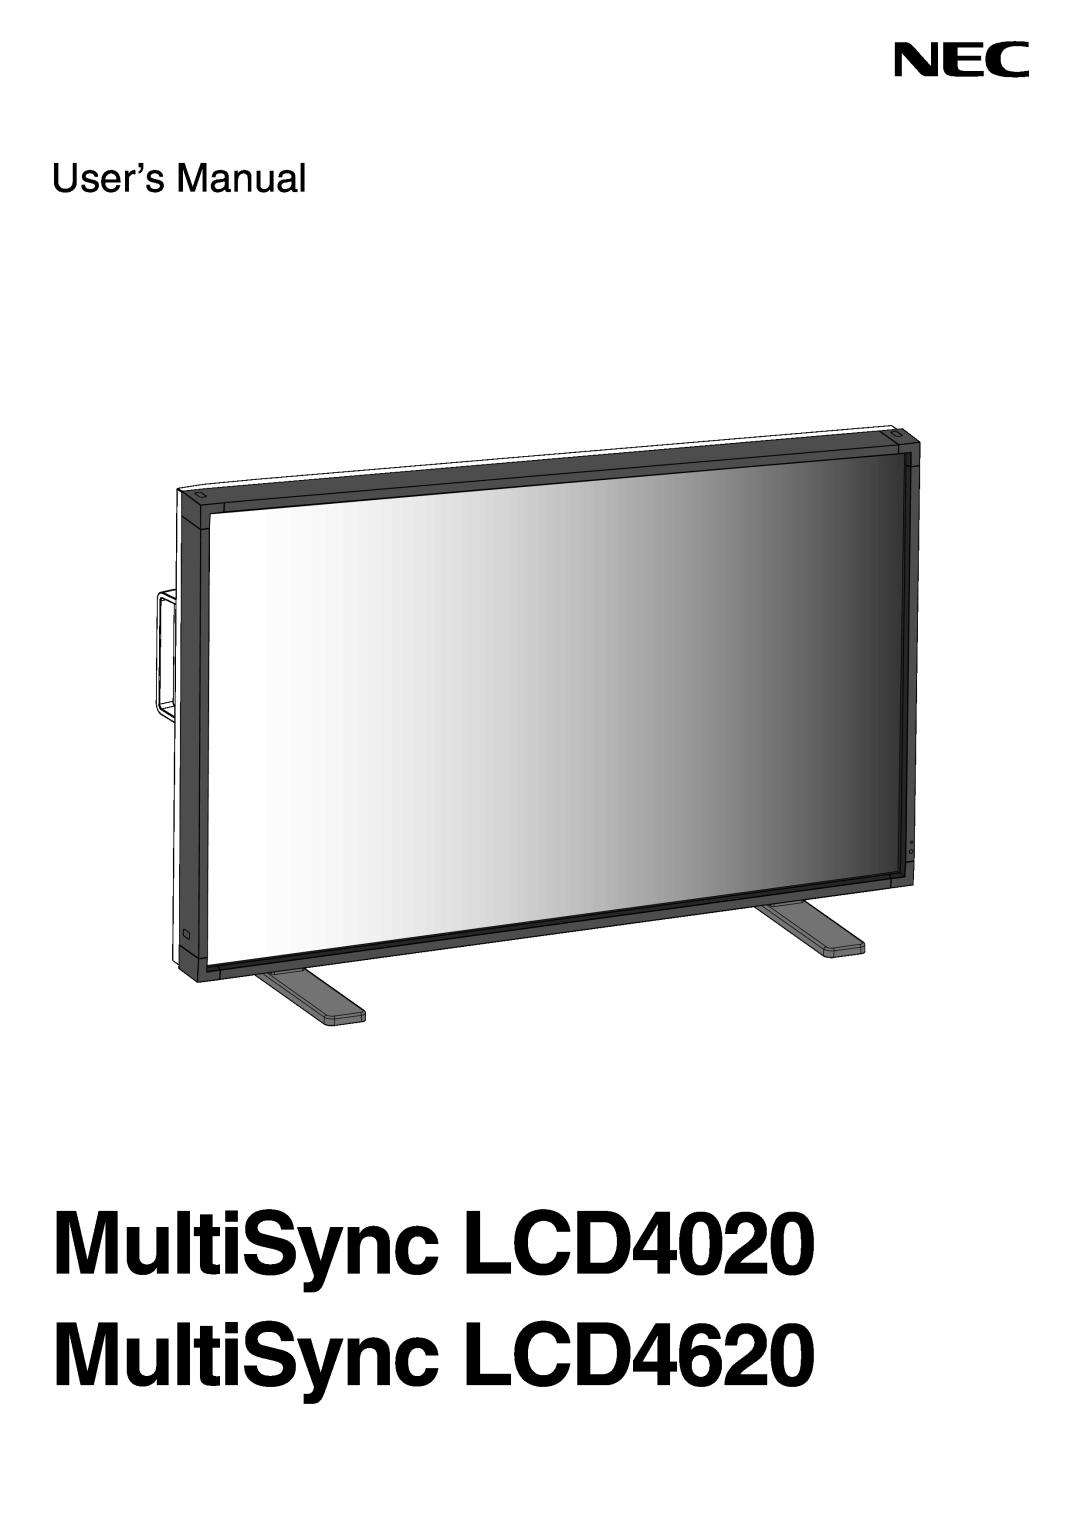 NEC LCD4620 manual Top View, Side View, NEC 2x2 LCD TileMatrix Video Wall Solution, Pre-ConfiguredSolution 